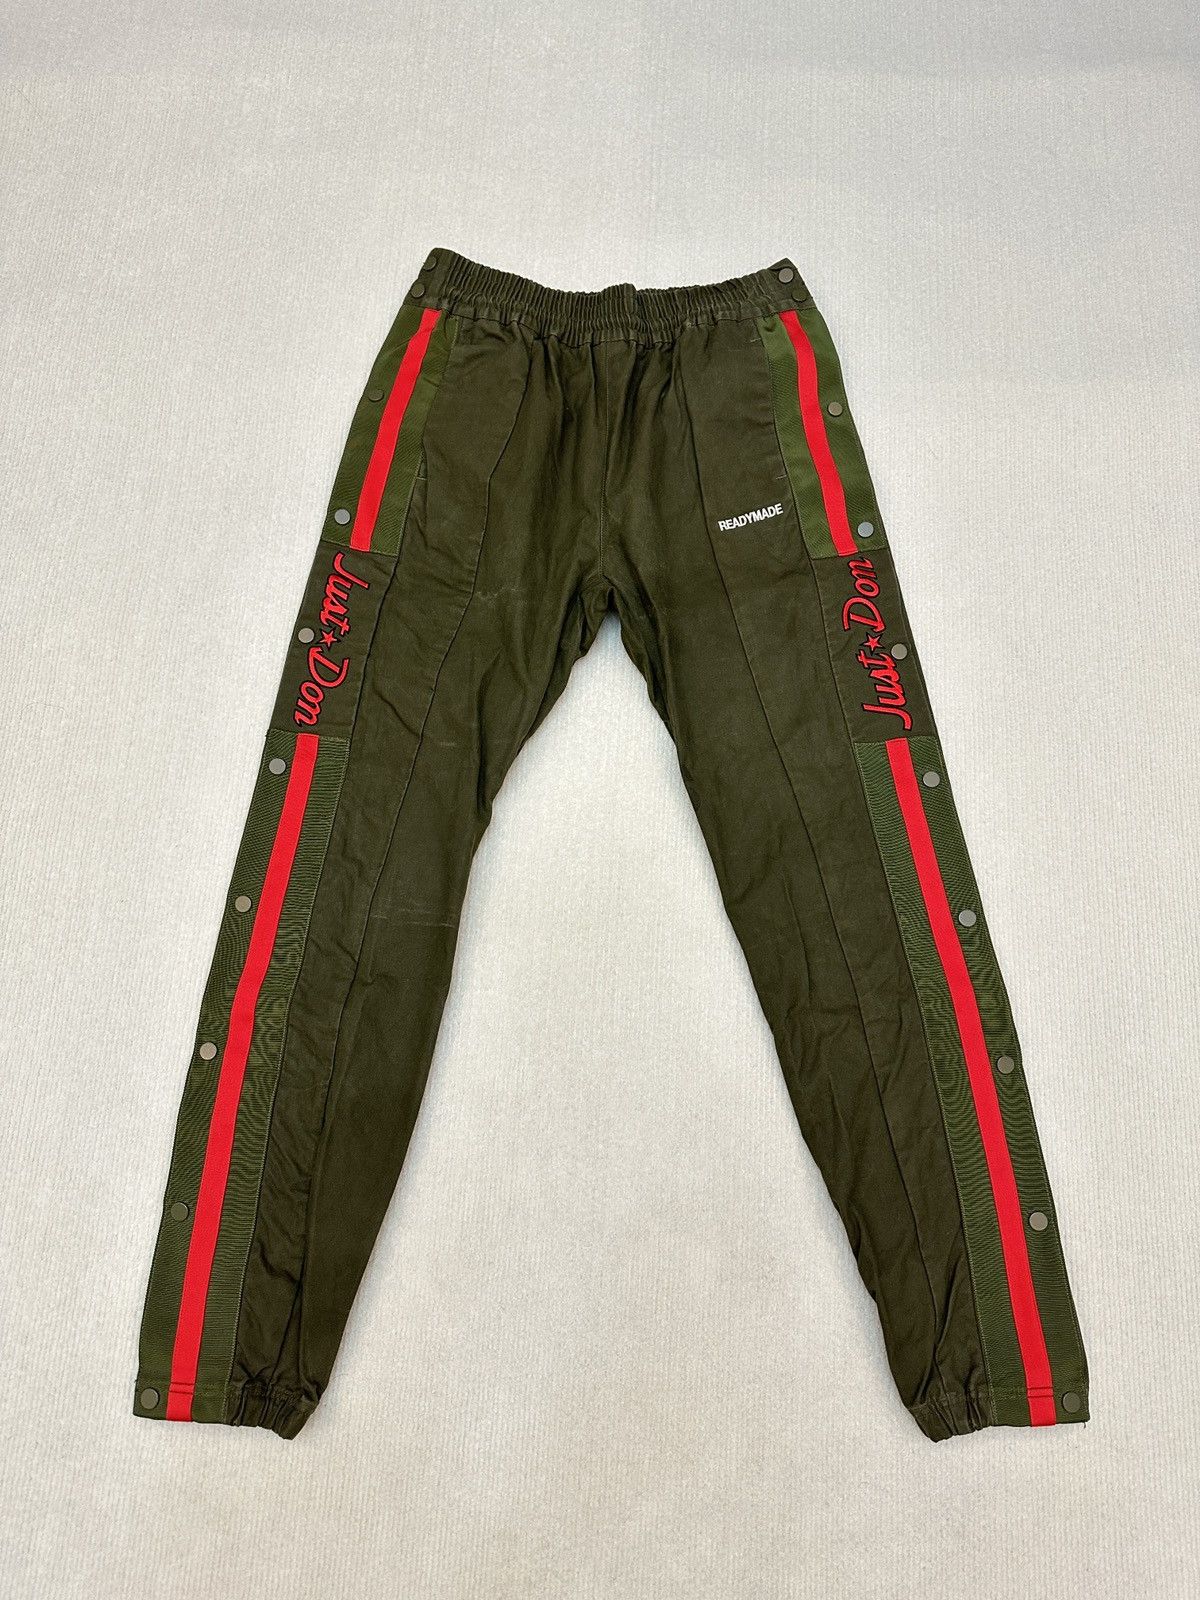 Just Don Readymade Just Don Track Pants | Grailed